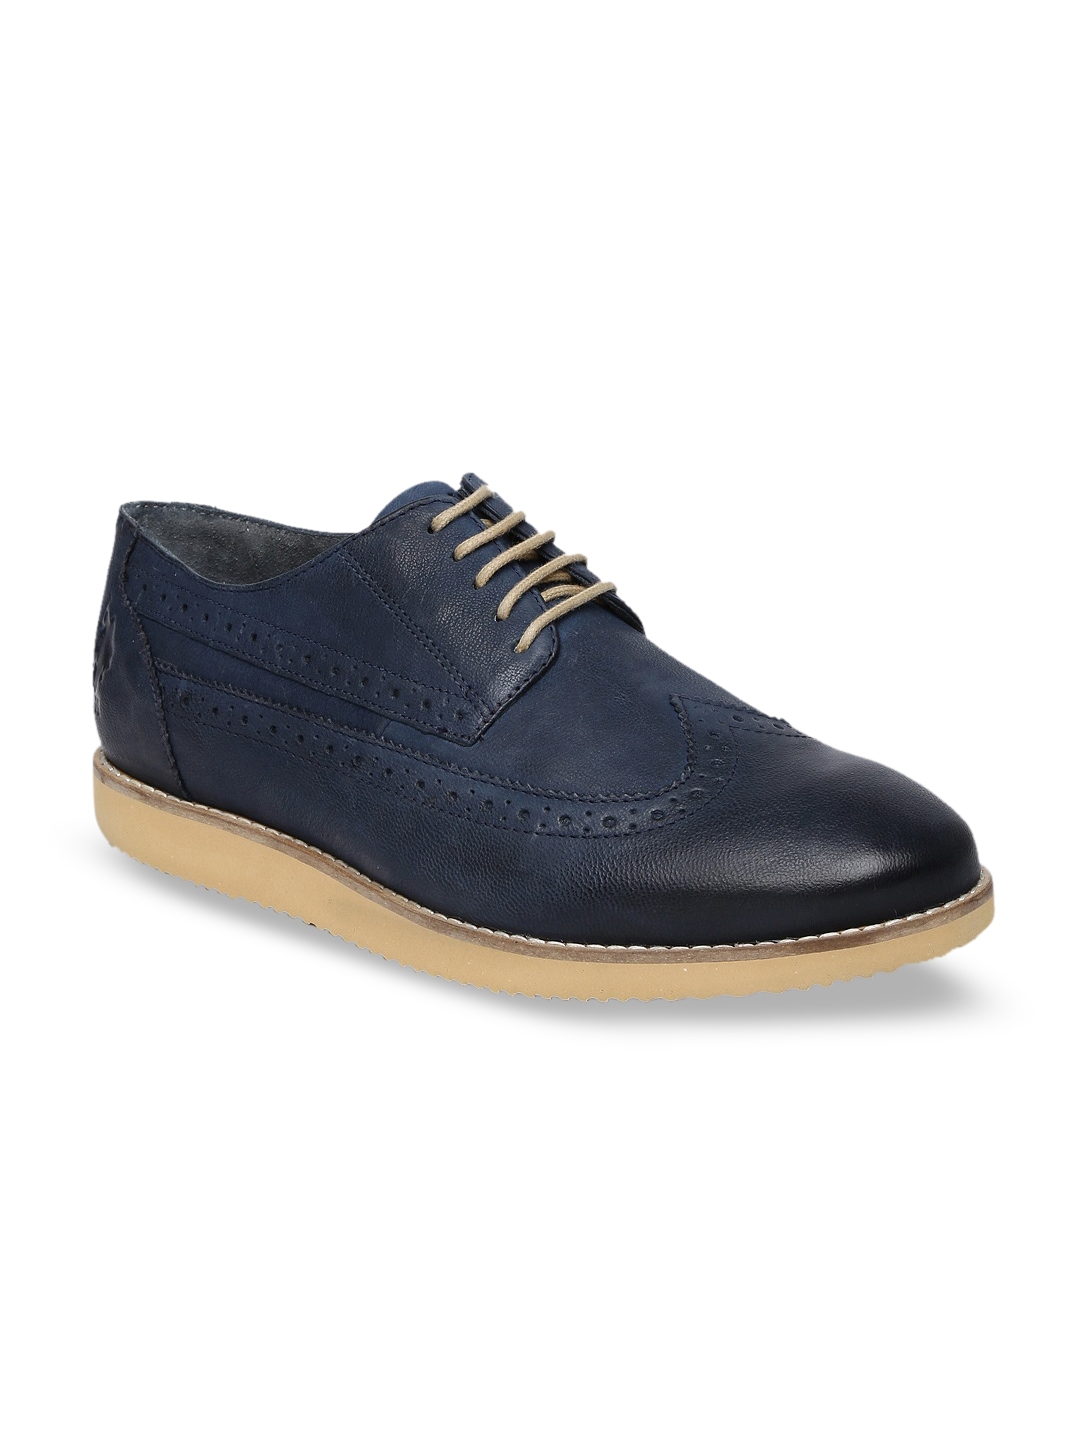 Buy U.S. Polo Assn. Men Navy Blue Leather Brogues - Casual Shoes for ...